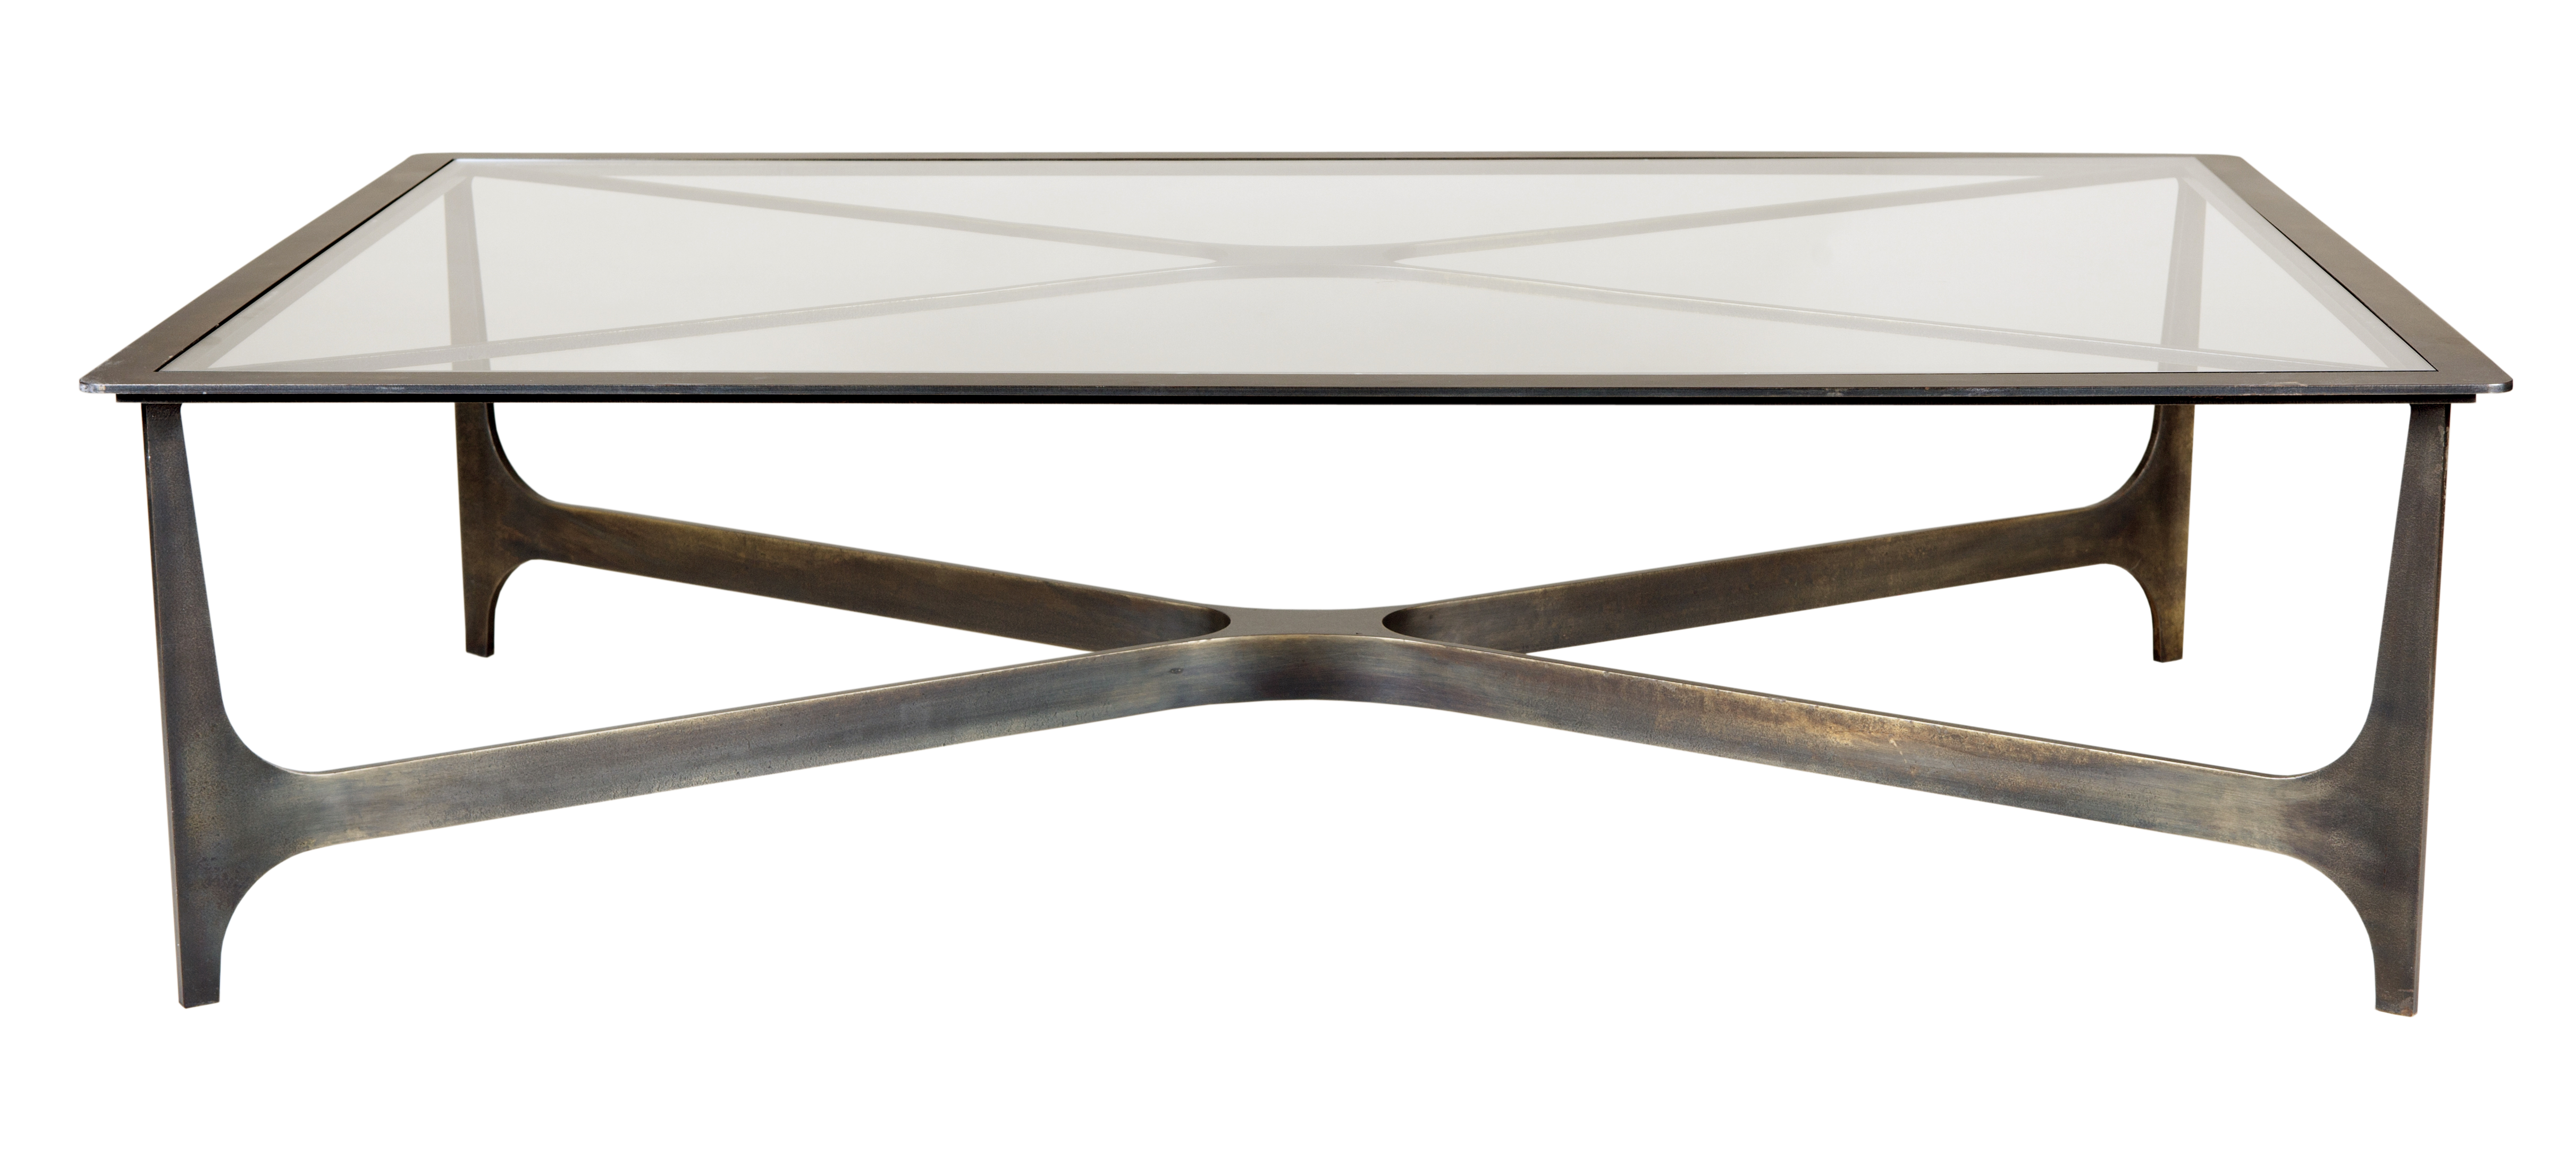 Orbit Rectangle Coffee Table/ Bronze Base, Top Glasschristopher Intended For Rectangular Coffee Tables With Pedestal Bases (View 18 of 20)